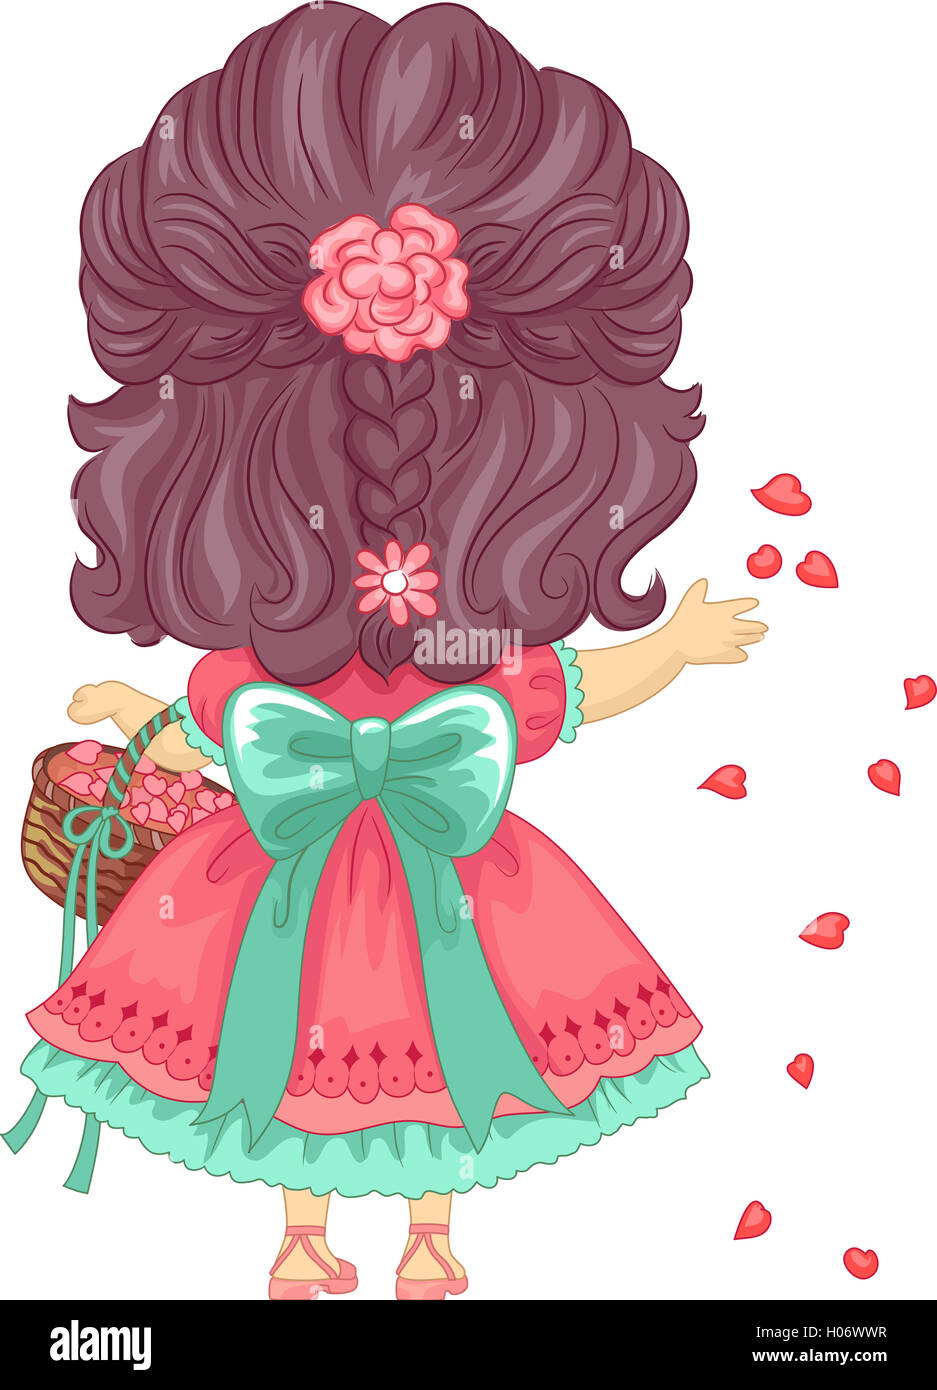 Back View Illustration of a Little Girl Scattering Petals Stock Photo